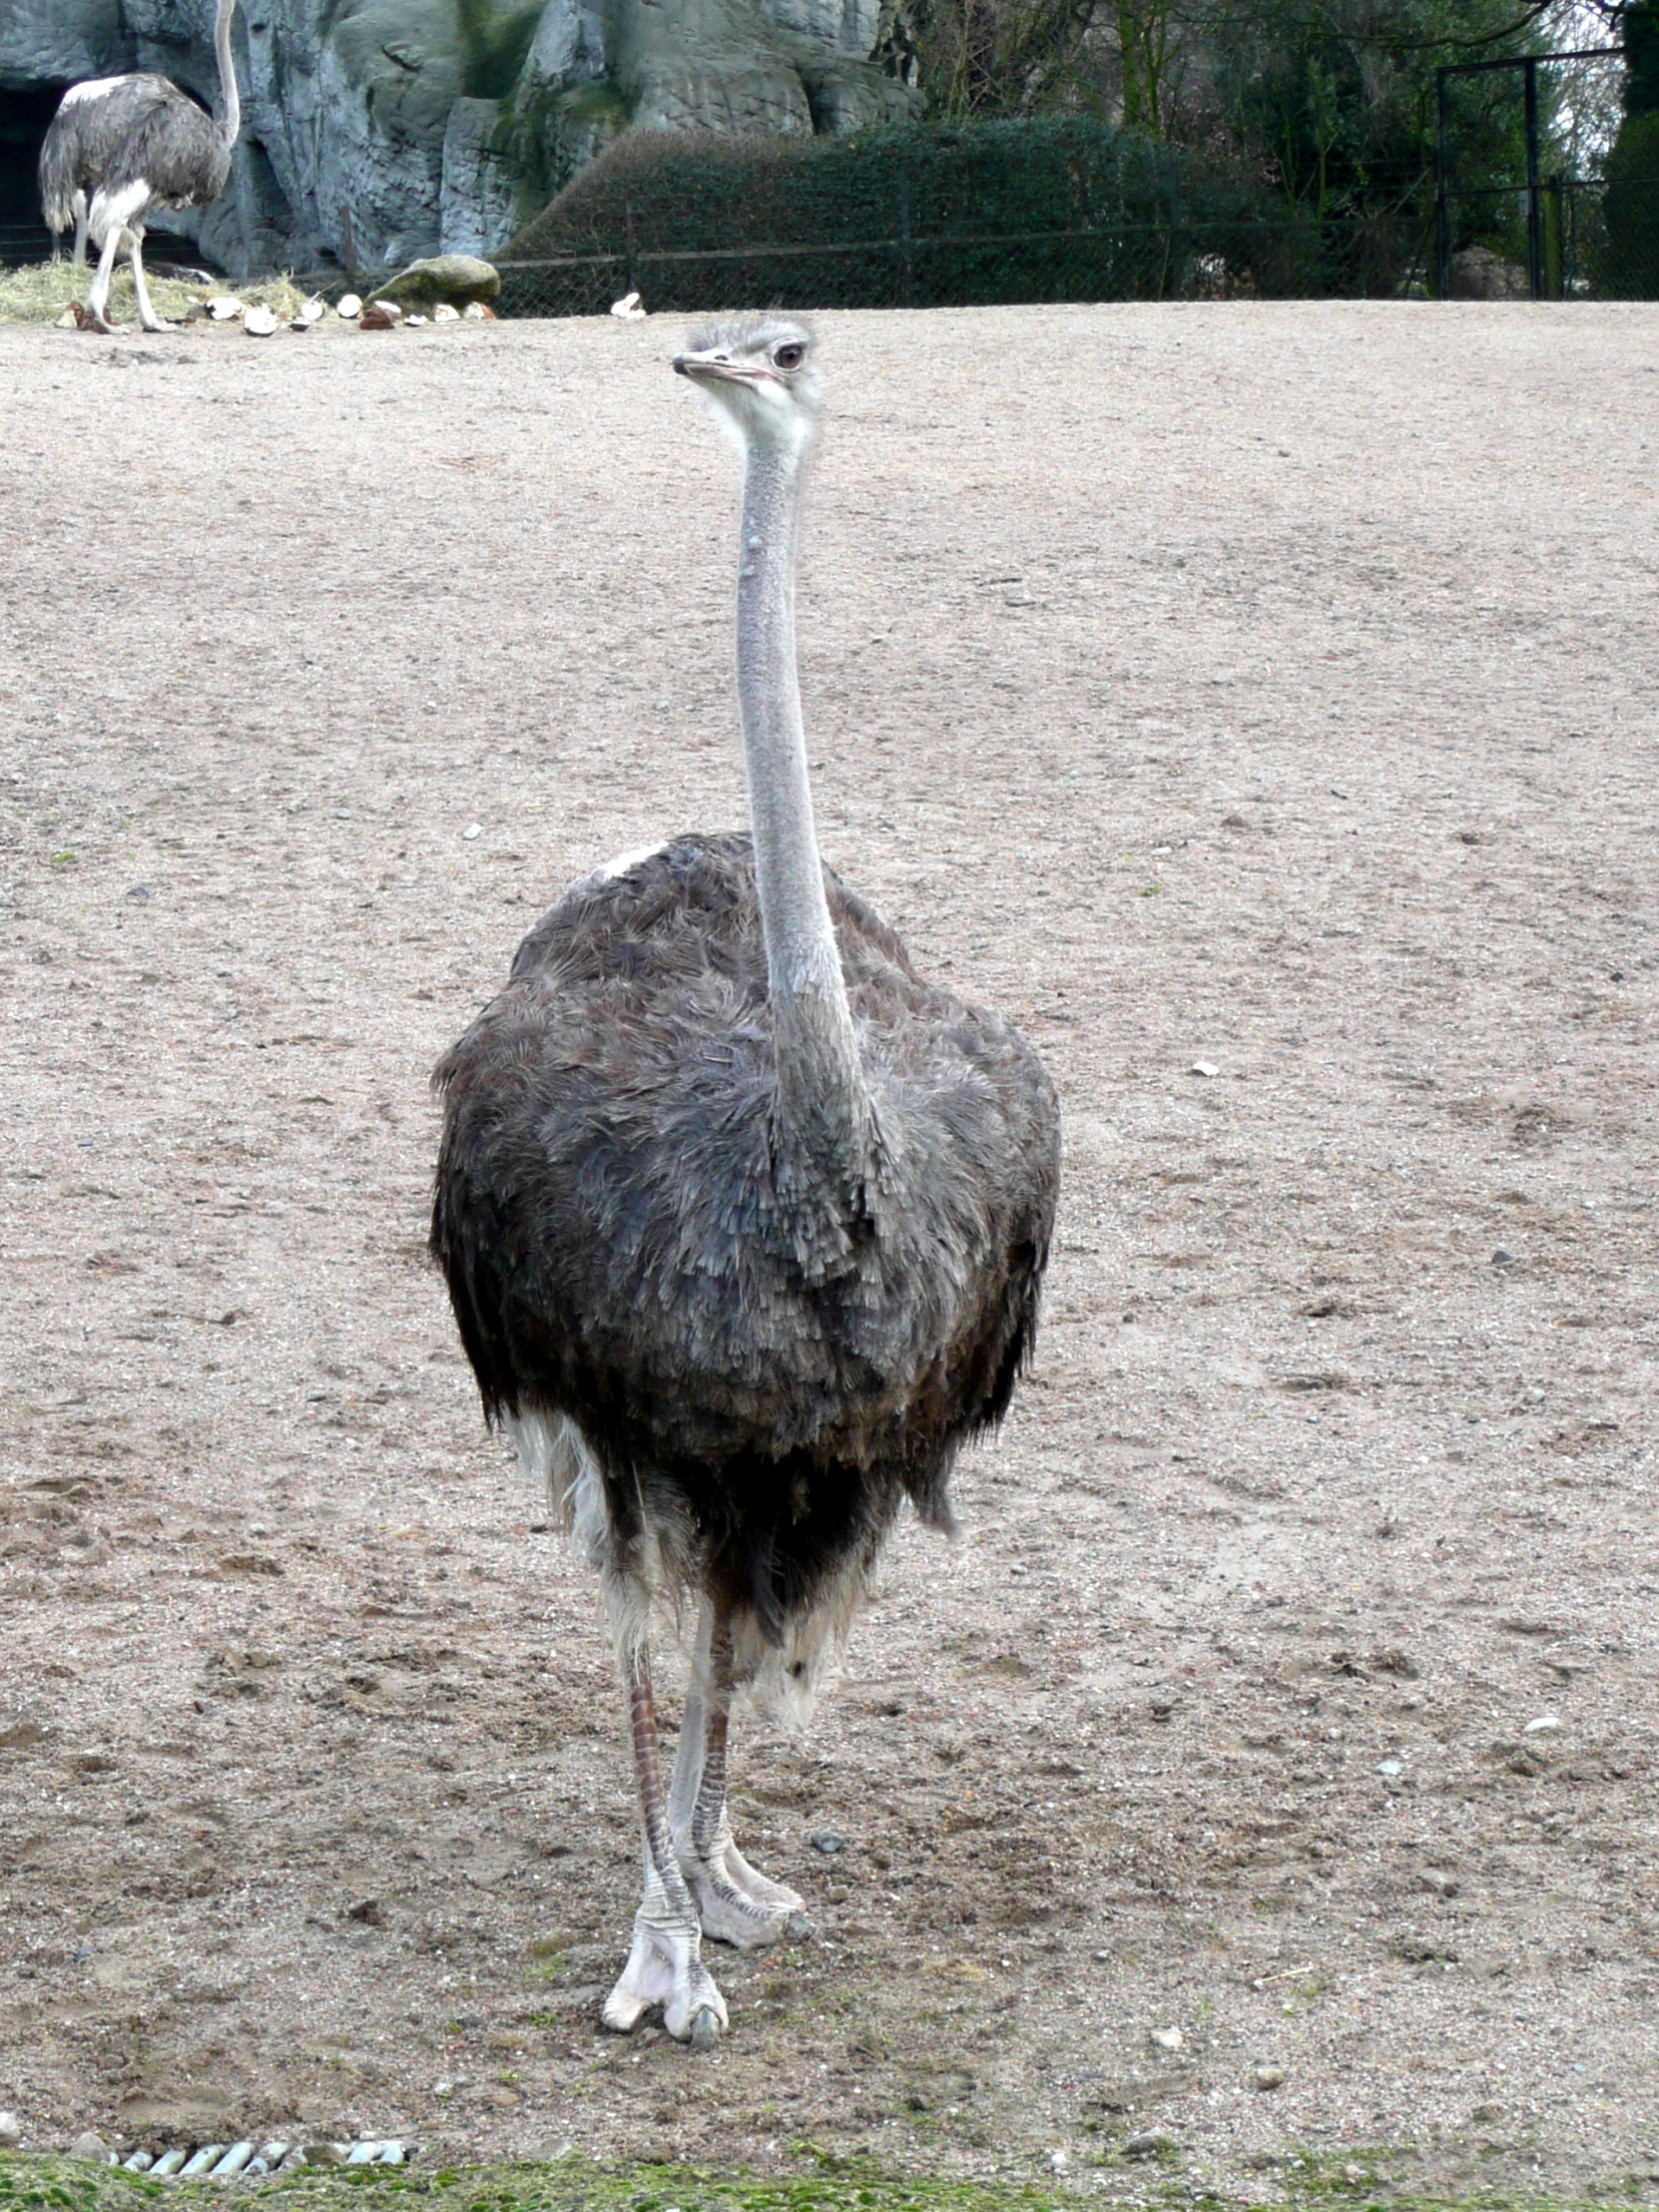 an ostrich standing on the grass, in the middle of some sand